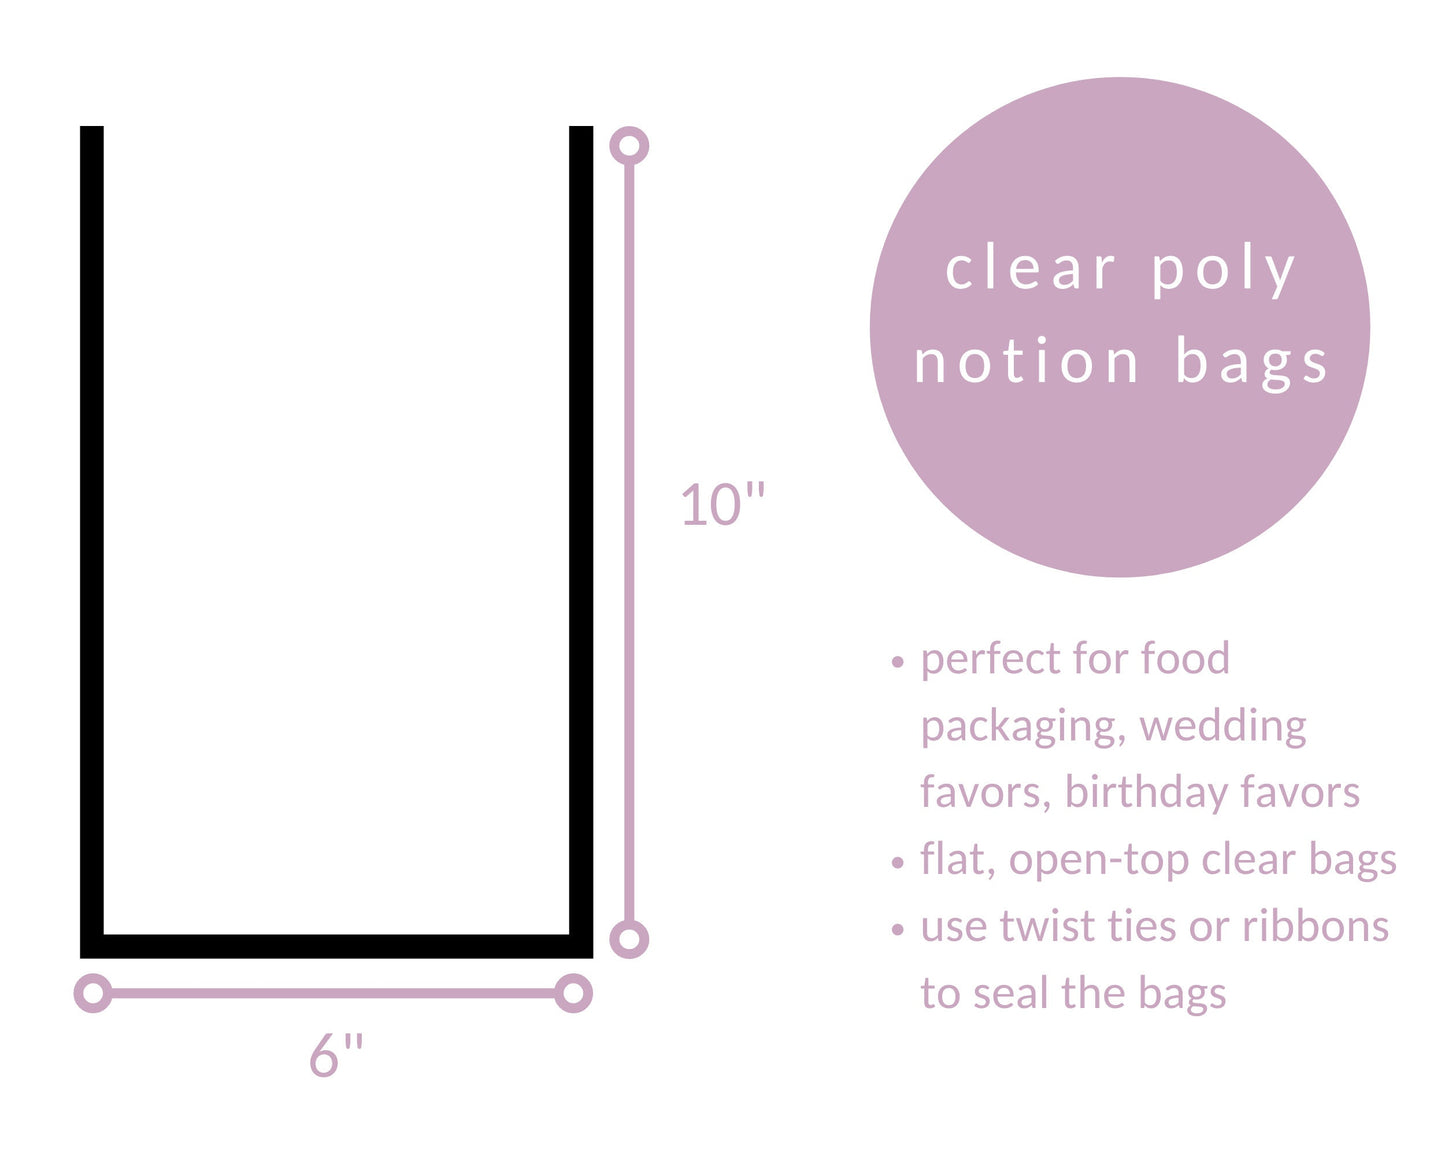 6x10 CLEAR Poly Notion Bags